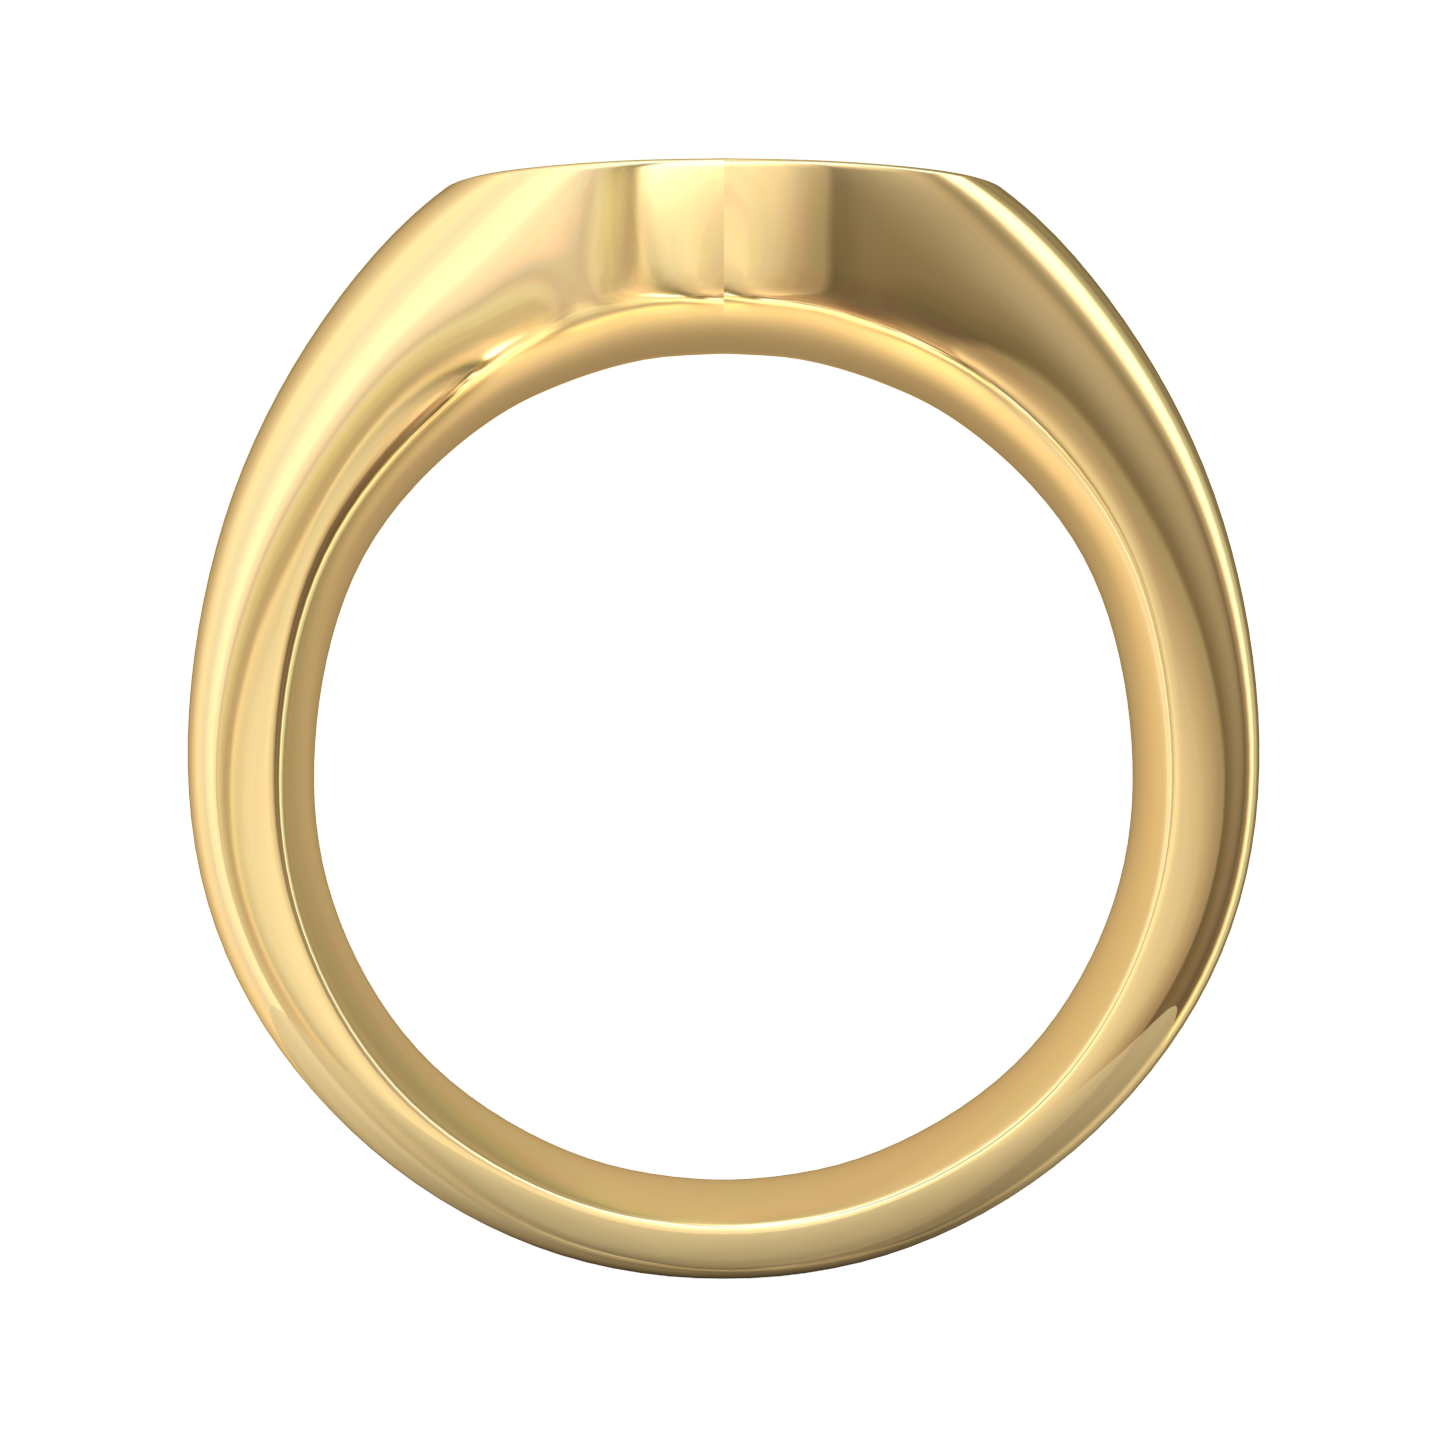 Oval Signet Ring 13x11mm  Gardiner Brothers   